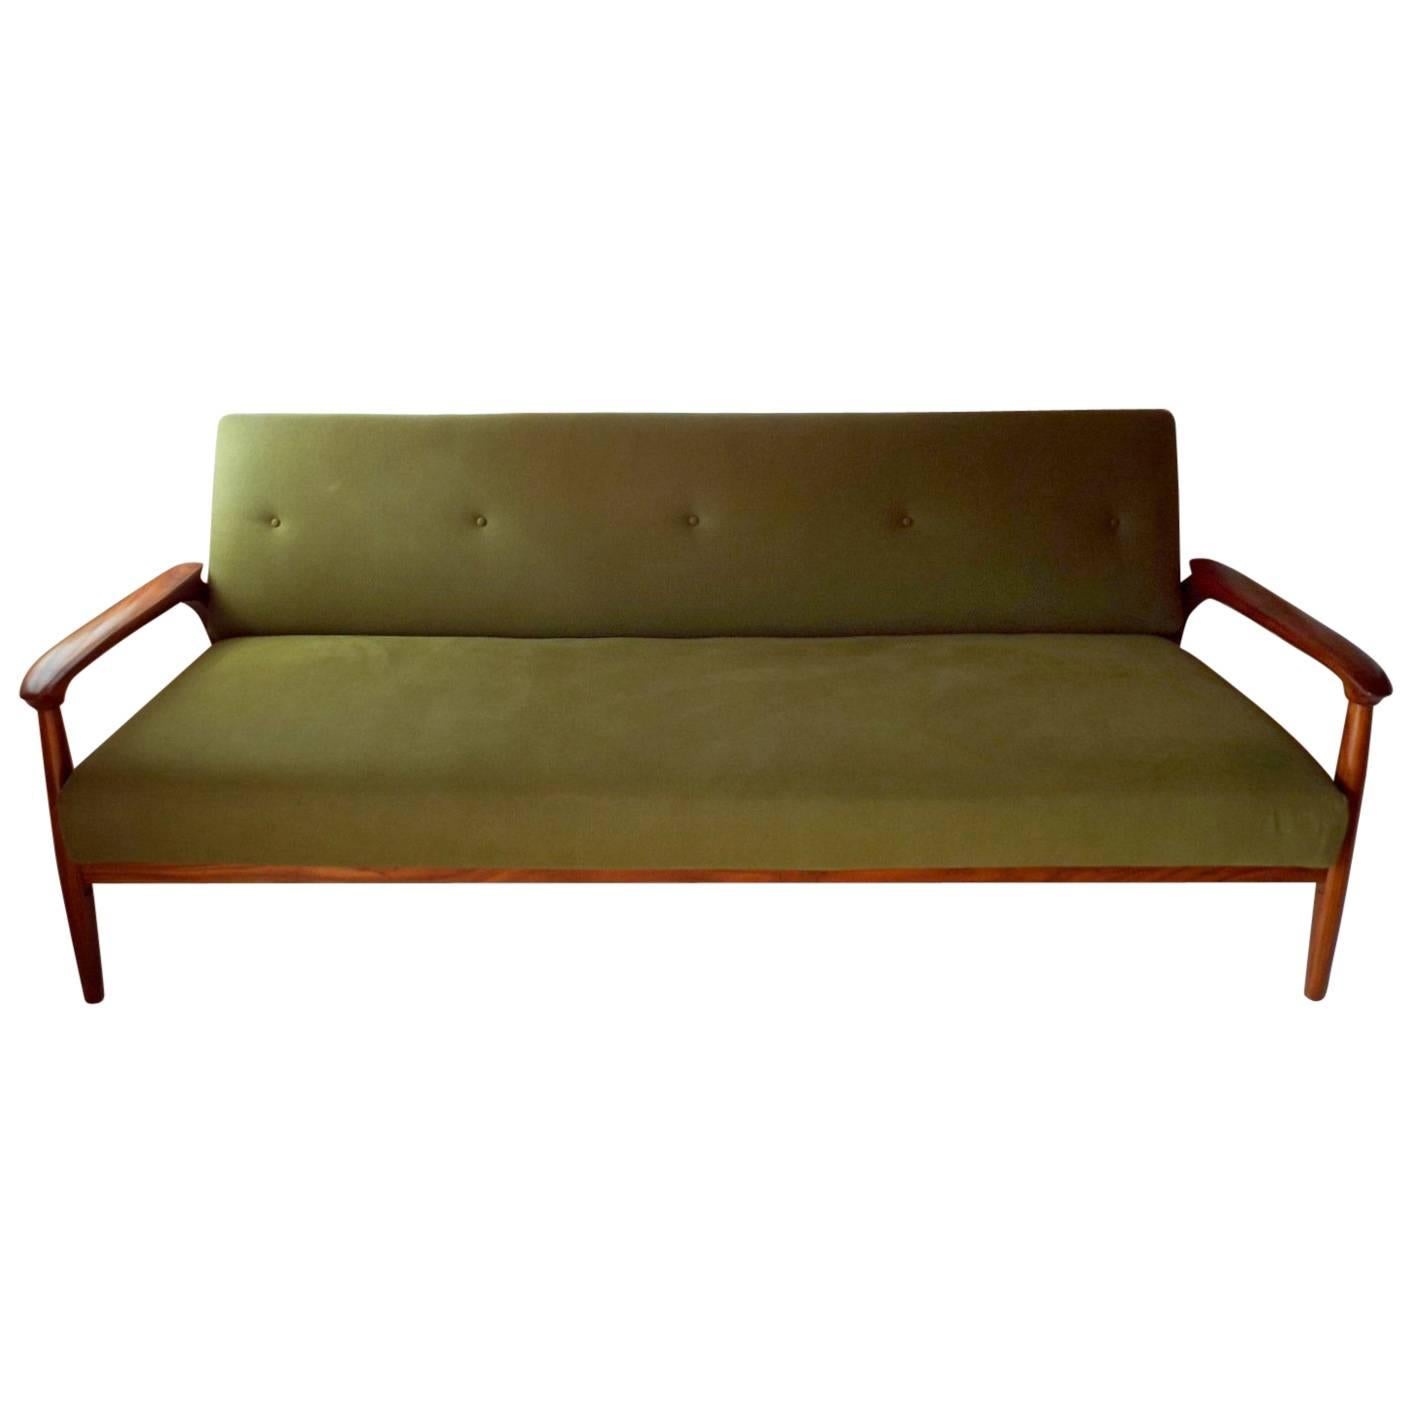 1960s Greaves and Thomas Sofa Bed For Sale